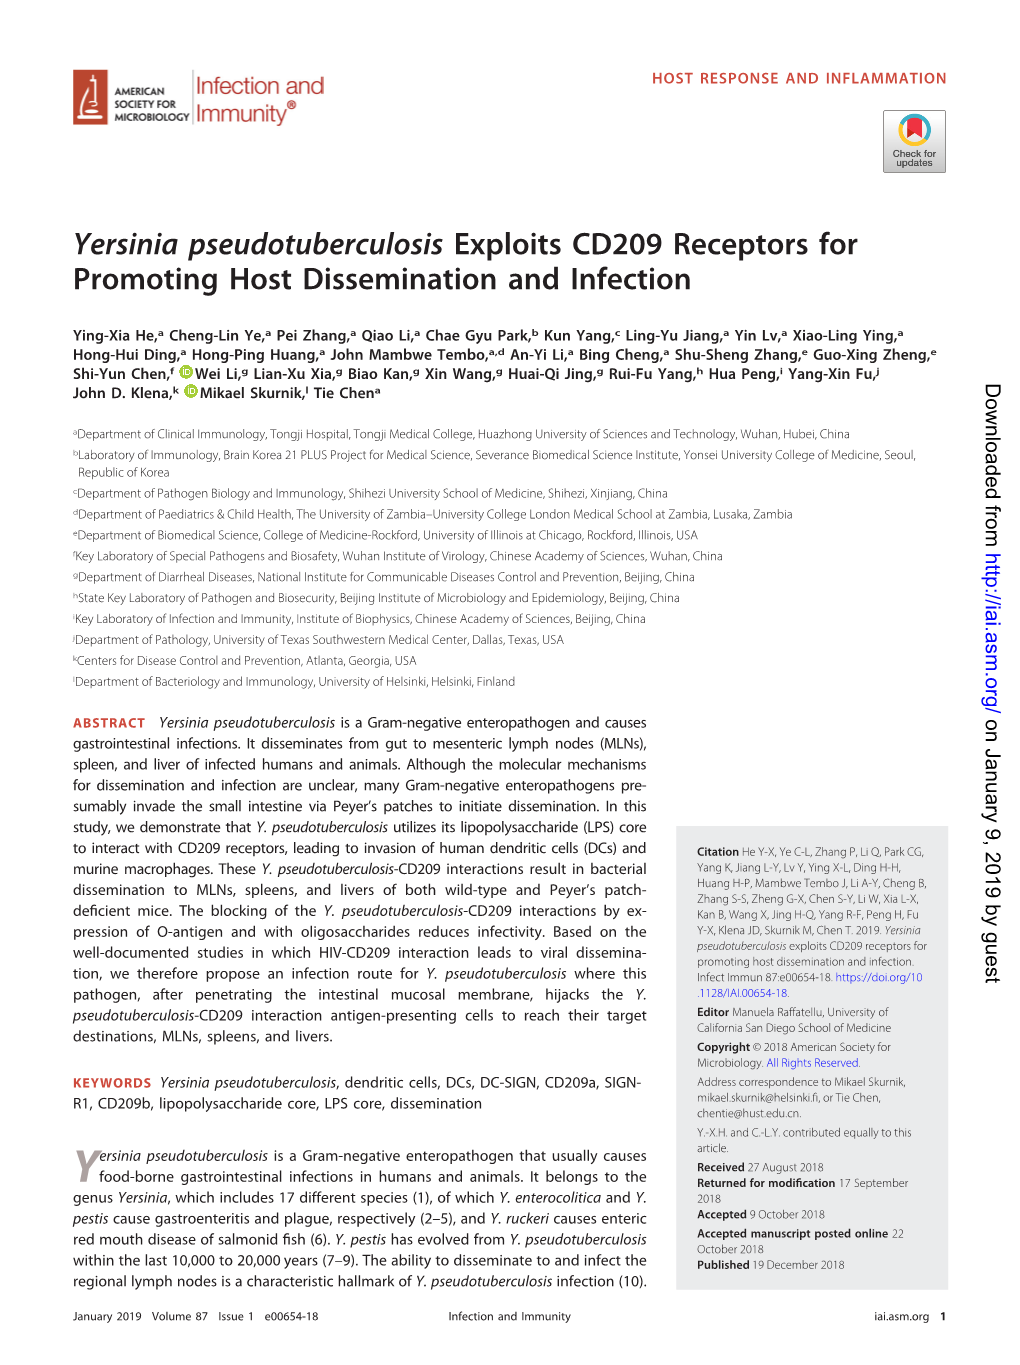 Yersinia Pseudotuberculosis Exploits CD209 Receptors for Promoting Host Dissemination and Infection